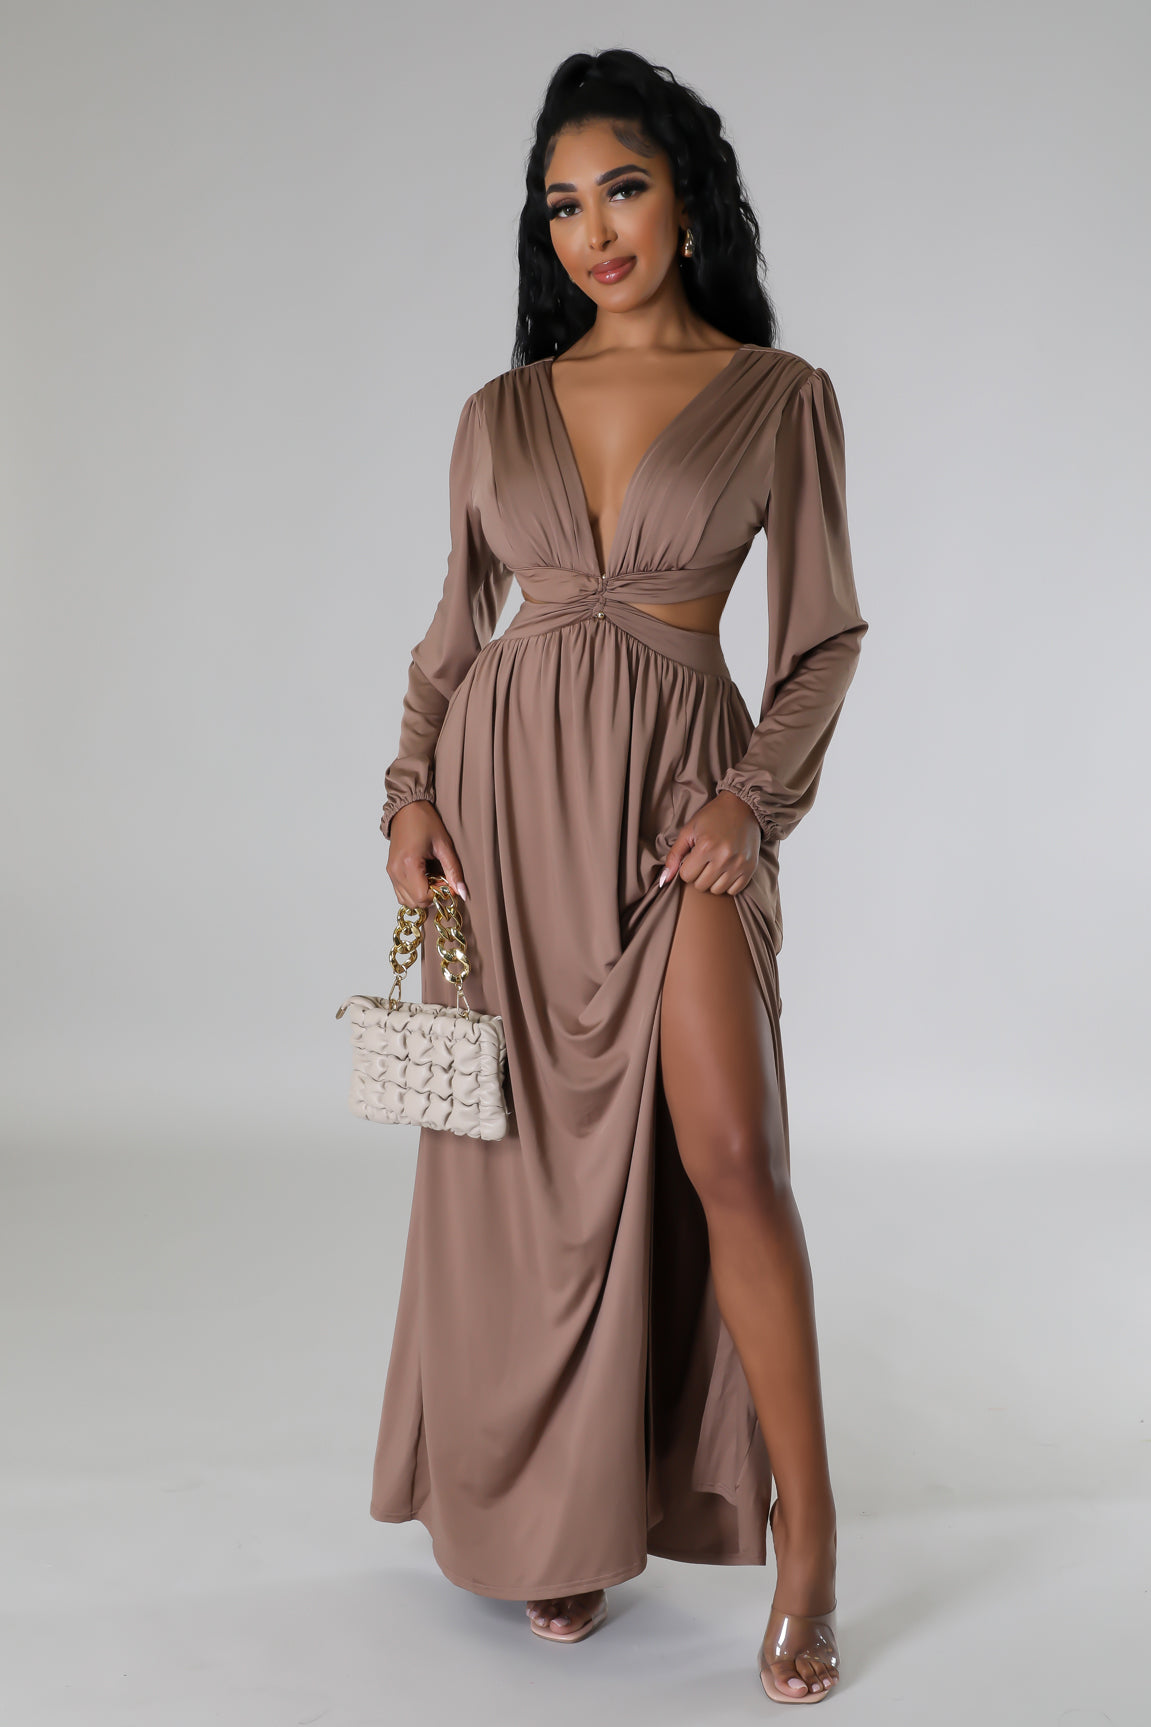 Undeniable Attraction Dress